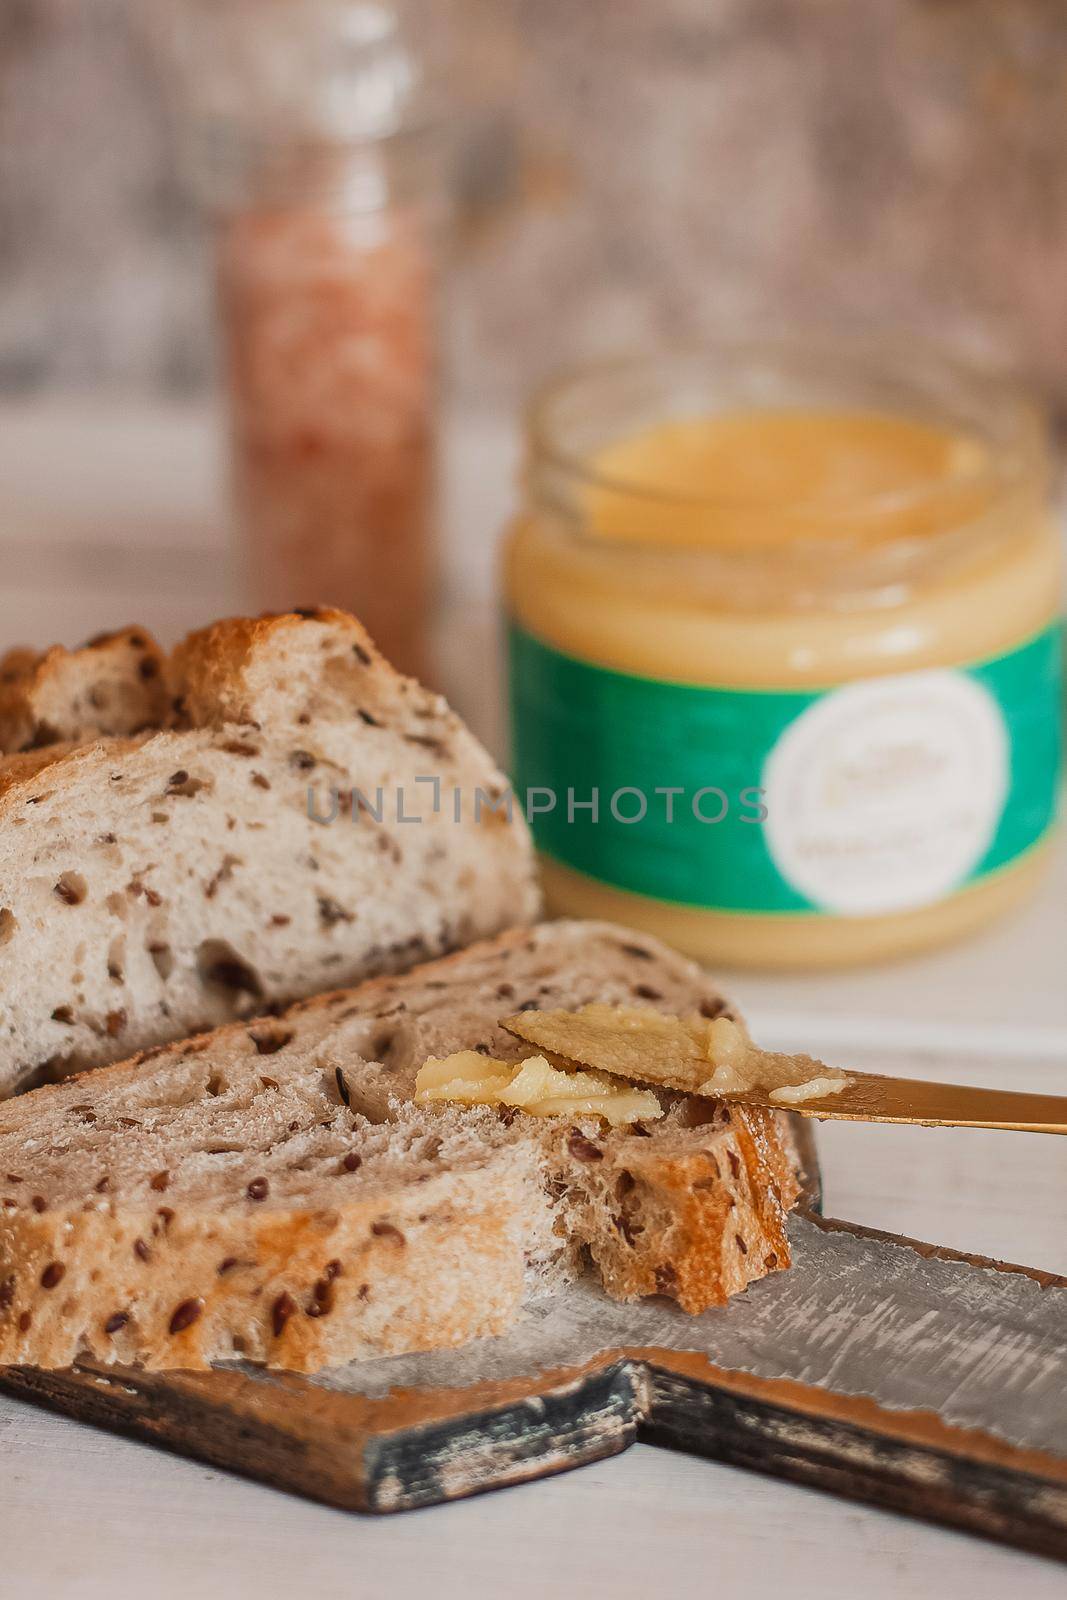 Ghee butter in glass jar and sliced bread on table. Healthy eating, breakfast.